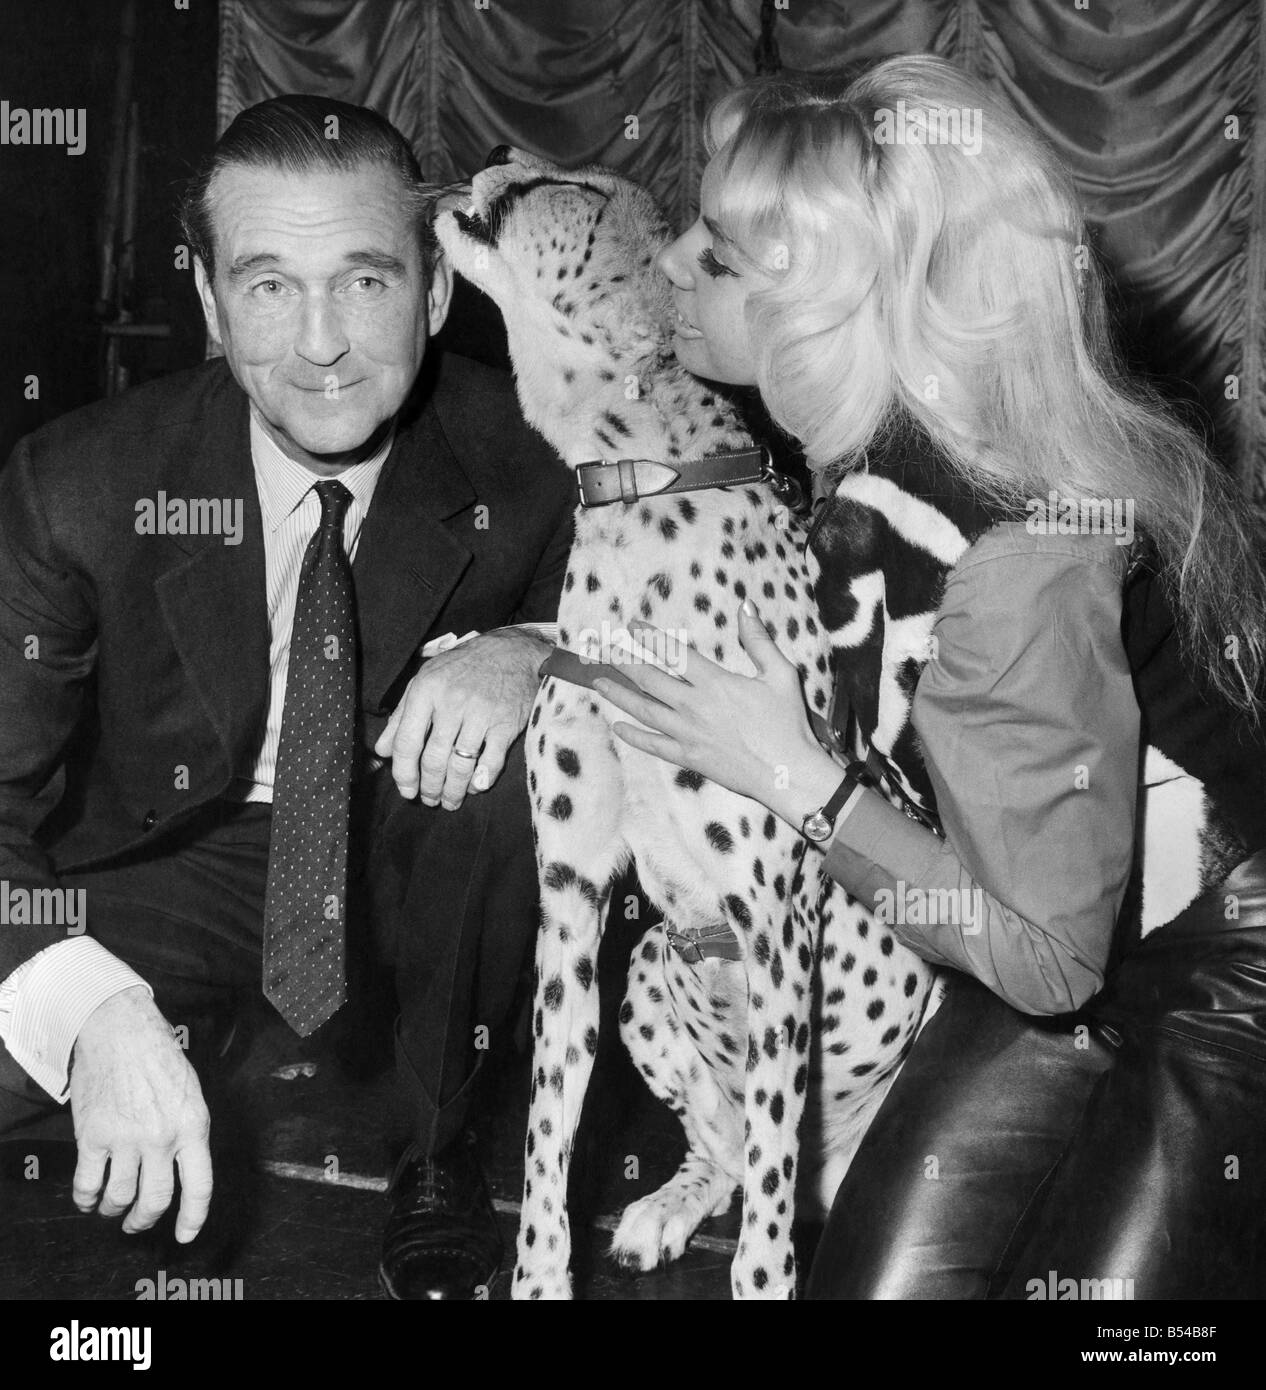 Lord Bath visited Ginni the cheetah who is in quaretine at the Raymond's Revuebar, Soho, to-day. When Ginni comes out of quarentine in two months Lord Bath has invited her to visit him at his home at Longleat, Wilts. Where he will have 50 lions roaming in the grounds of his 100 acre reserve. When Ginni goes she will be with her partner in her act Rita-Elan a 23 year old stripper from Australia. Ginni helps disrobe Rita-Elan during her act. Pictured making friends with Lord Bath, Ginni and Rita Elan. Taken at the Raymond Revuebar this morning. March 1966 P017148 Stock Photo